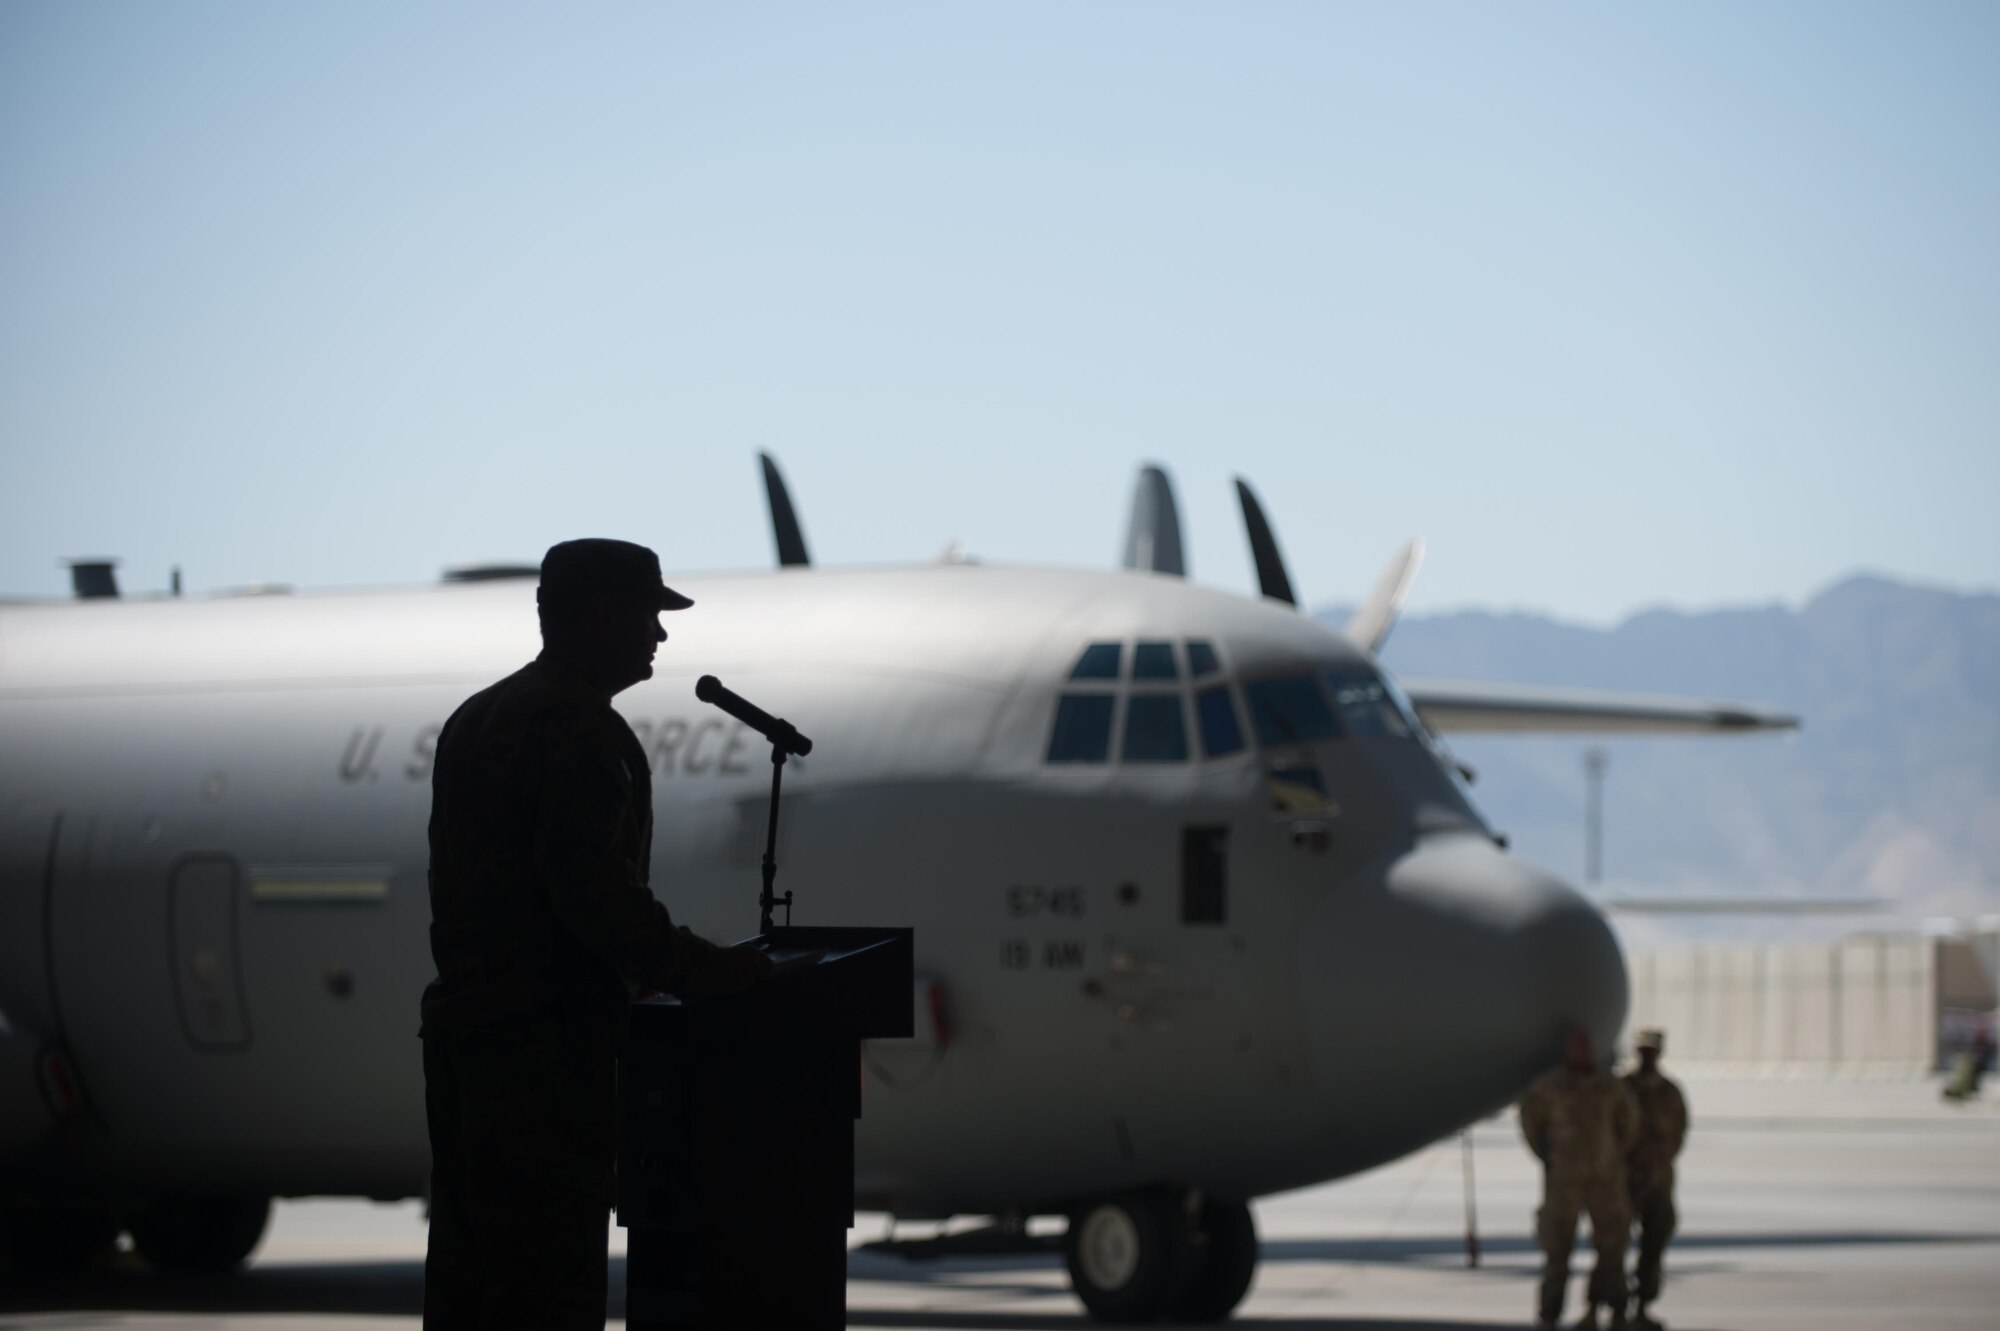 U.S. Air Force Maj. Gen. Scott West, 9th Air and Space Expeditionary Task Force-Afghanistan commander, speaks during the 455th Air Expeditionary Wing change of command July 1, 2015, at Bagram Airfield, Afghanistan. During the ceremony Brig. Gen. Kelly relinquished command of the 455th AEW to Brig. Gen. Dave Julazadeh. (U.S. Air Force photo by Senior Airman Cierra Presentado/Released)